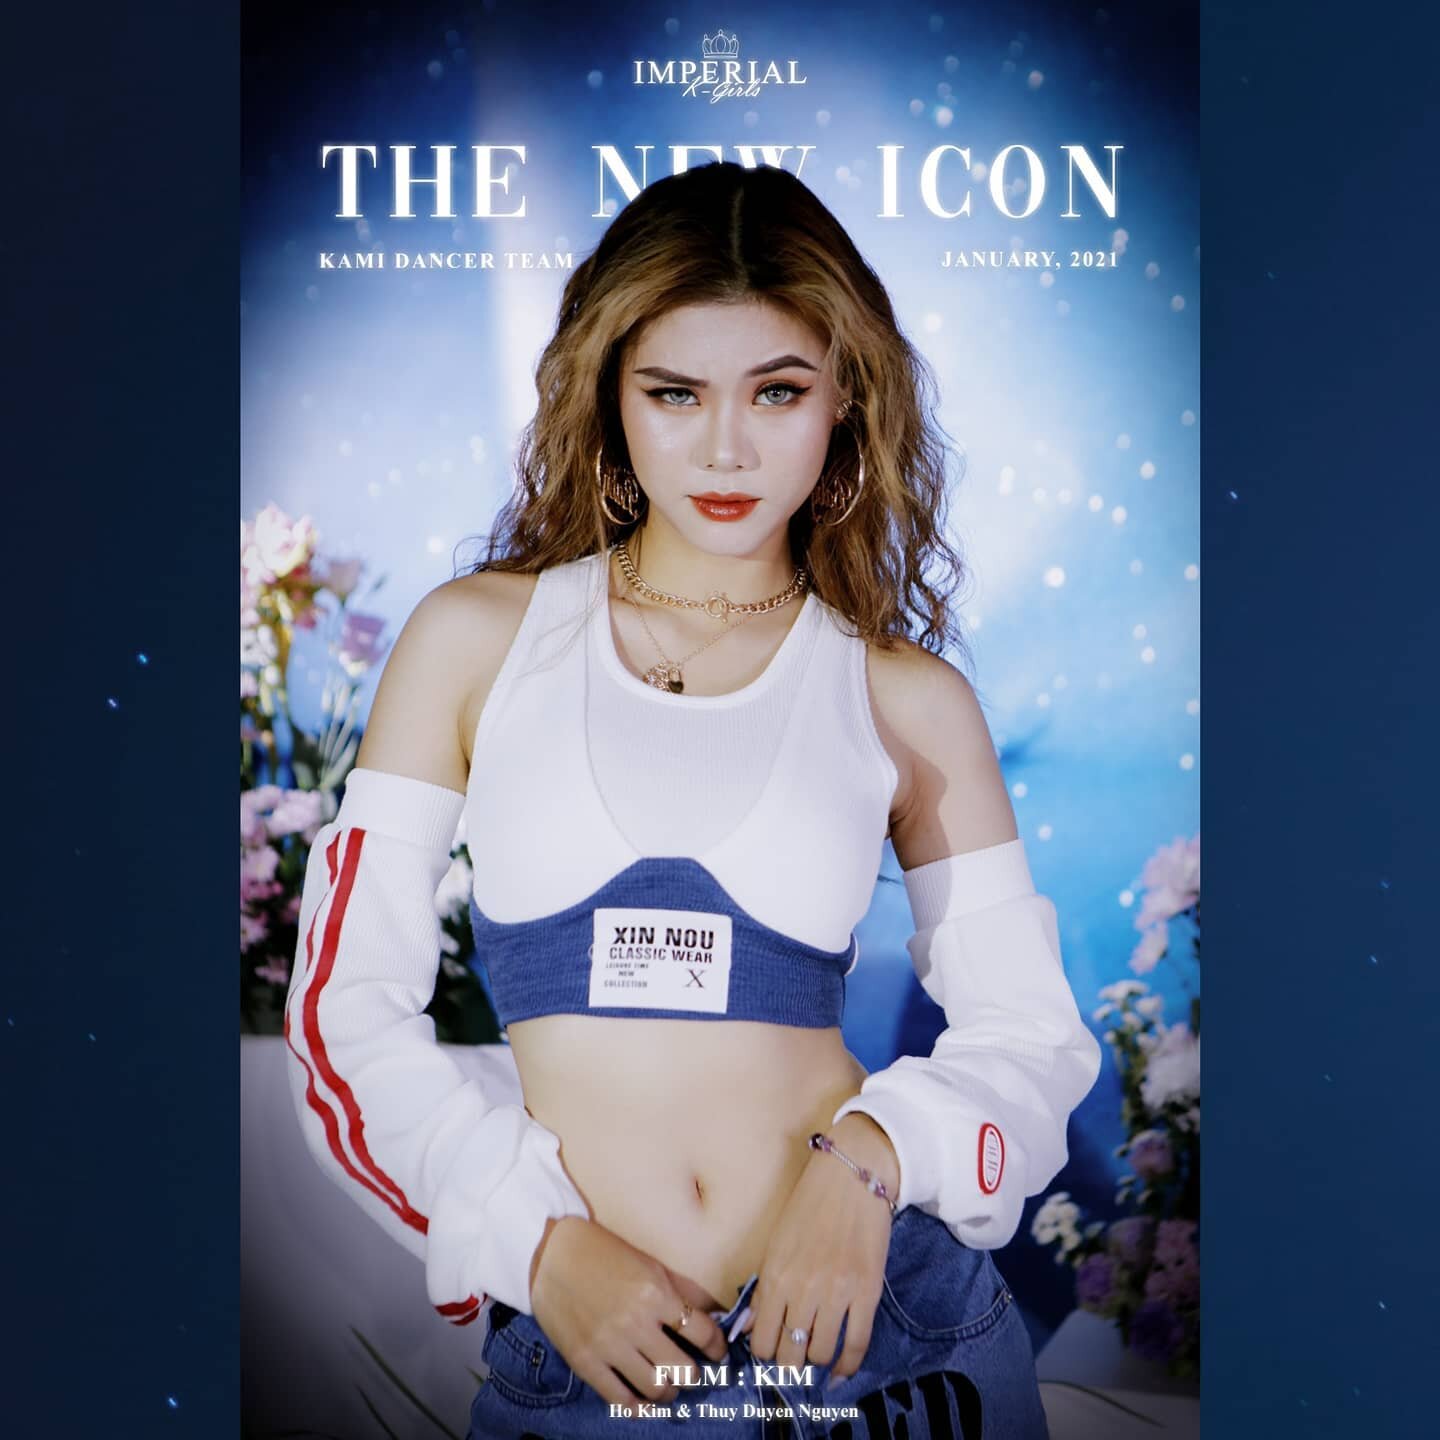 The New Icon : @thuykim1906
Feat. Imperial K-Girls
by @by.hokim &amp; @thelookbookedition
.
#KTeam #KGirls #Kboys #ImperialKGirls
#hcmc #dancer #illusionstudio 
.
❤&nbsp; 𝗖𝗼𝗻𝘁𝗮𝗰𝘁 𝗳𝗼𝗿 𝘄𝗼𝗿𝗸
𝗛𝗢𝗧𝗟𝗜𝗡𝗘 : 𝘮𝘴. 𝘒𝘢𝘮𝘪 0931 421 421 
𝗠